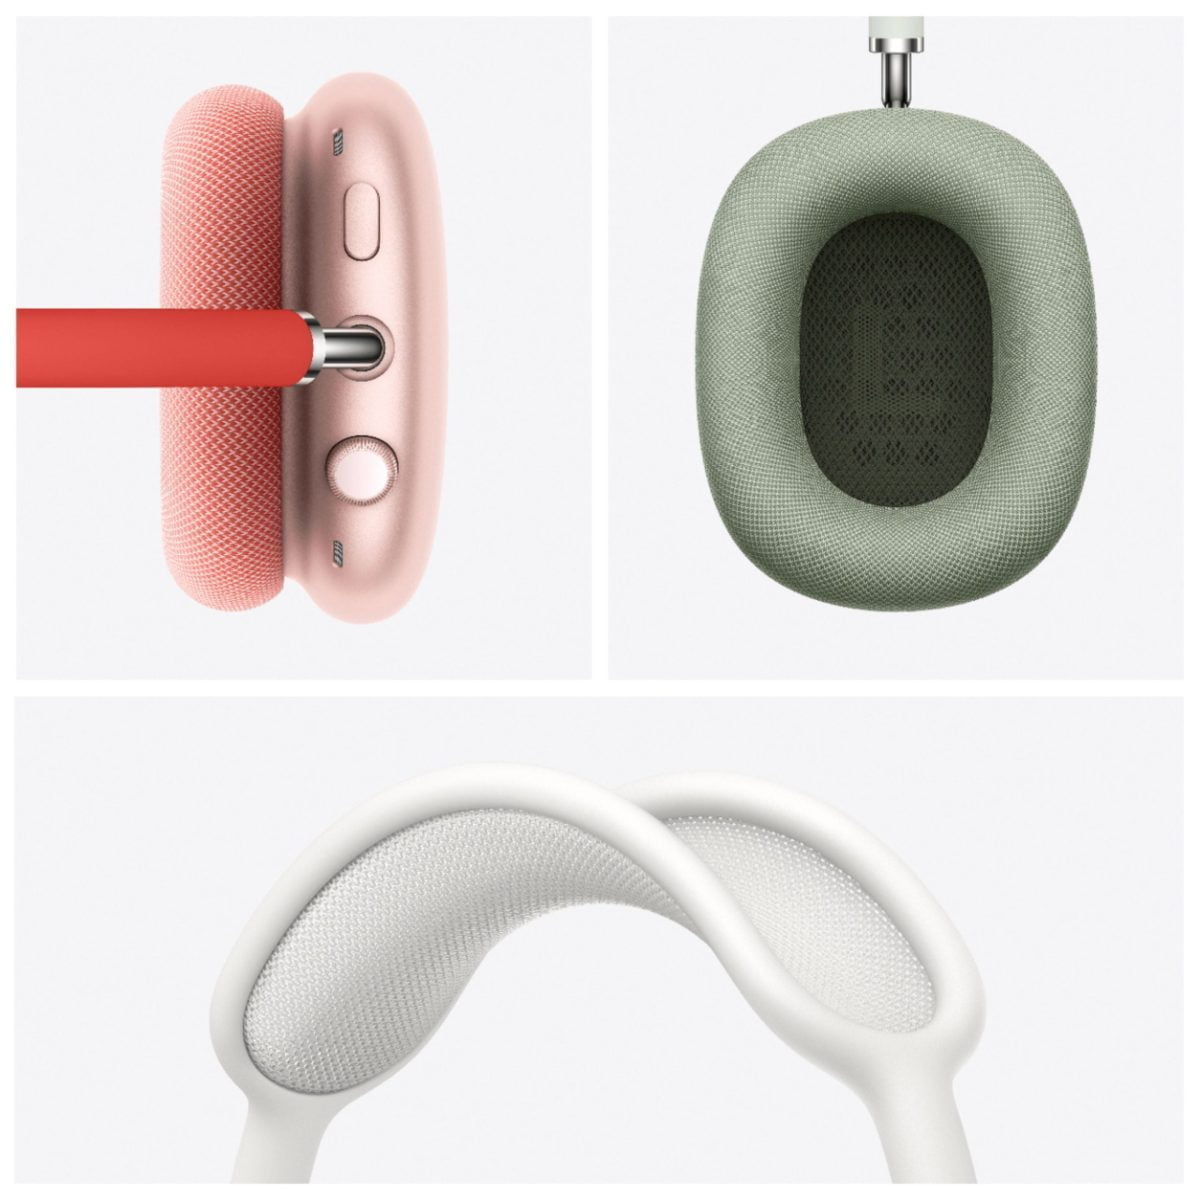 6373460Cv15D Scaled Apple &Lt;H1&Gt;Apple Airpods Max - Green&Lt;/H1&Gt; &Lt;Div Class=&Quot;Long-Description-Container Body-Copy &Quot;&Gt; &Lt;Div Class=&Quot;Product-Description&Quot;&Gt;Airpods Max Reimagine Over-Ear Headphones. An Apple-Designed Dynamic Driver Provides Immersive High-Fidelity Audio. Every Detail, From Canopy To Cushions, Has Been Designed For An Exceptional Fit. Active Noise Cancellation Blocks Outside Noise, While Transparency Mode Lets It In. And Spatial Audio With Dynamic Head Tracking Provides Theater-Like Sound That Surrounds You.&Lt;/Div&Gt; &Lt;/Div&Gt; Apple Airpods Apple Airpods Max - Green With Light Green Headband - Mgyn3